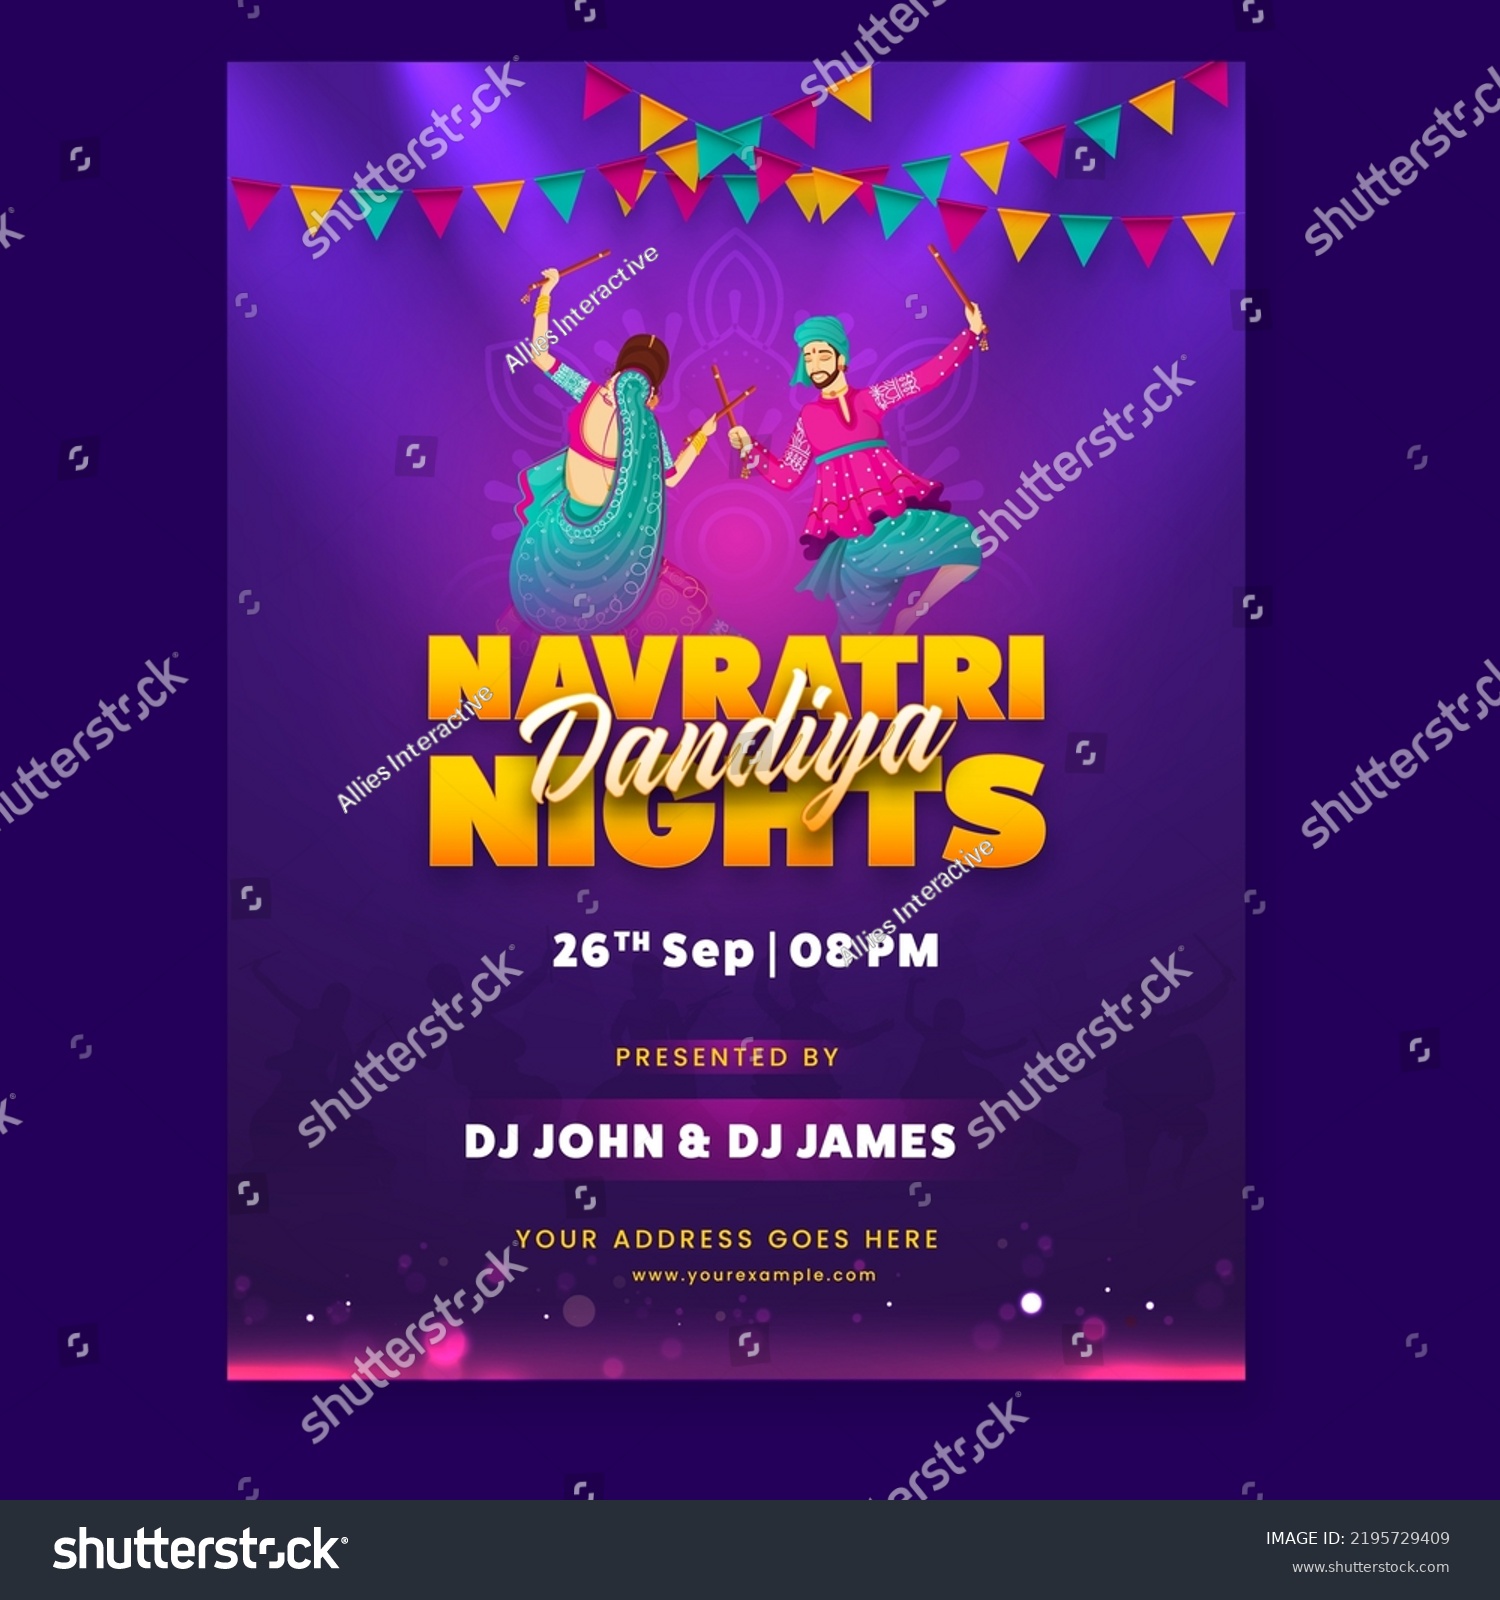 SVG of Navratri Dandiya Nights Party Invitation Card With Indian Couple Dancing And Event Details. svg